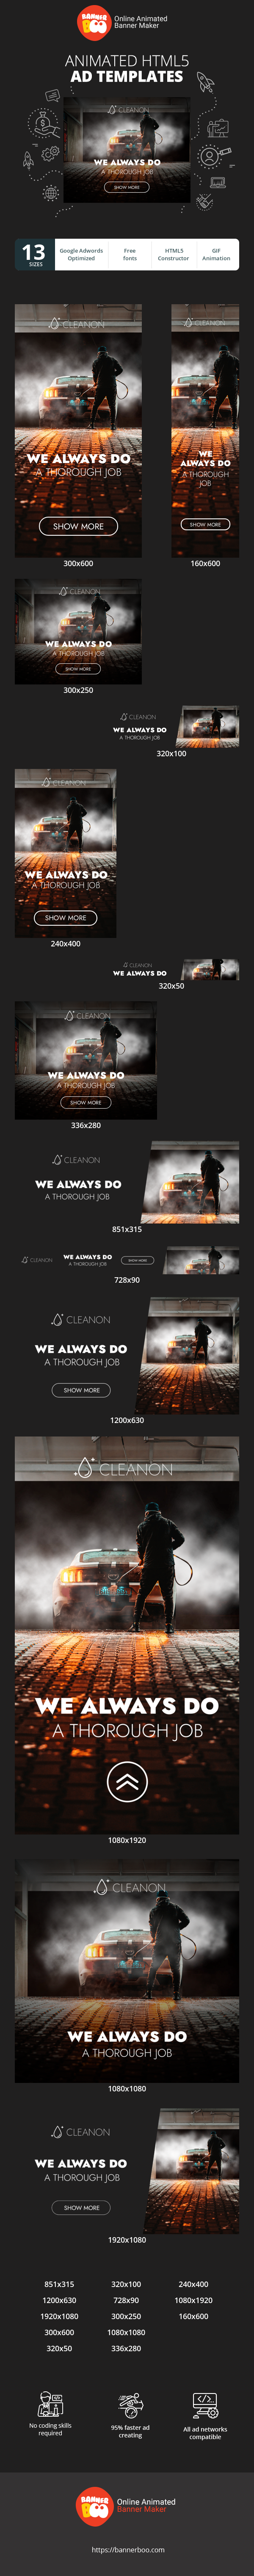 Banner ad template — We Always Do A Thorough Job — Transport